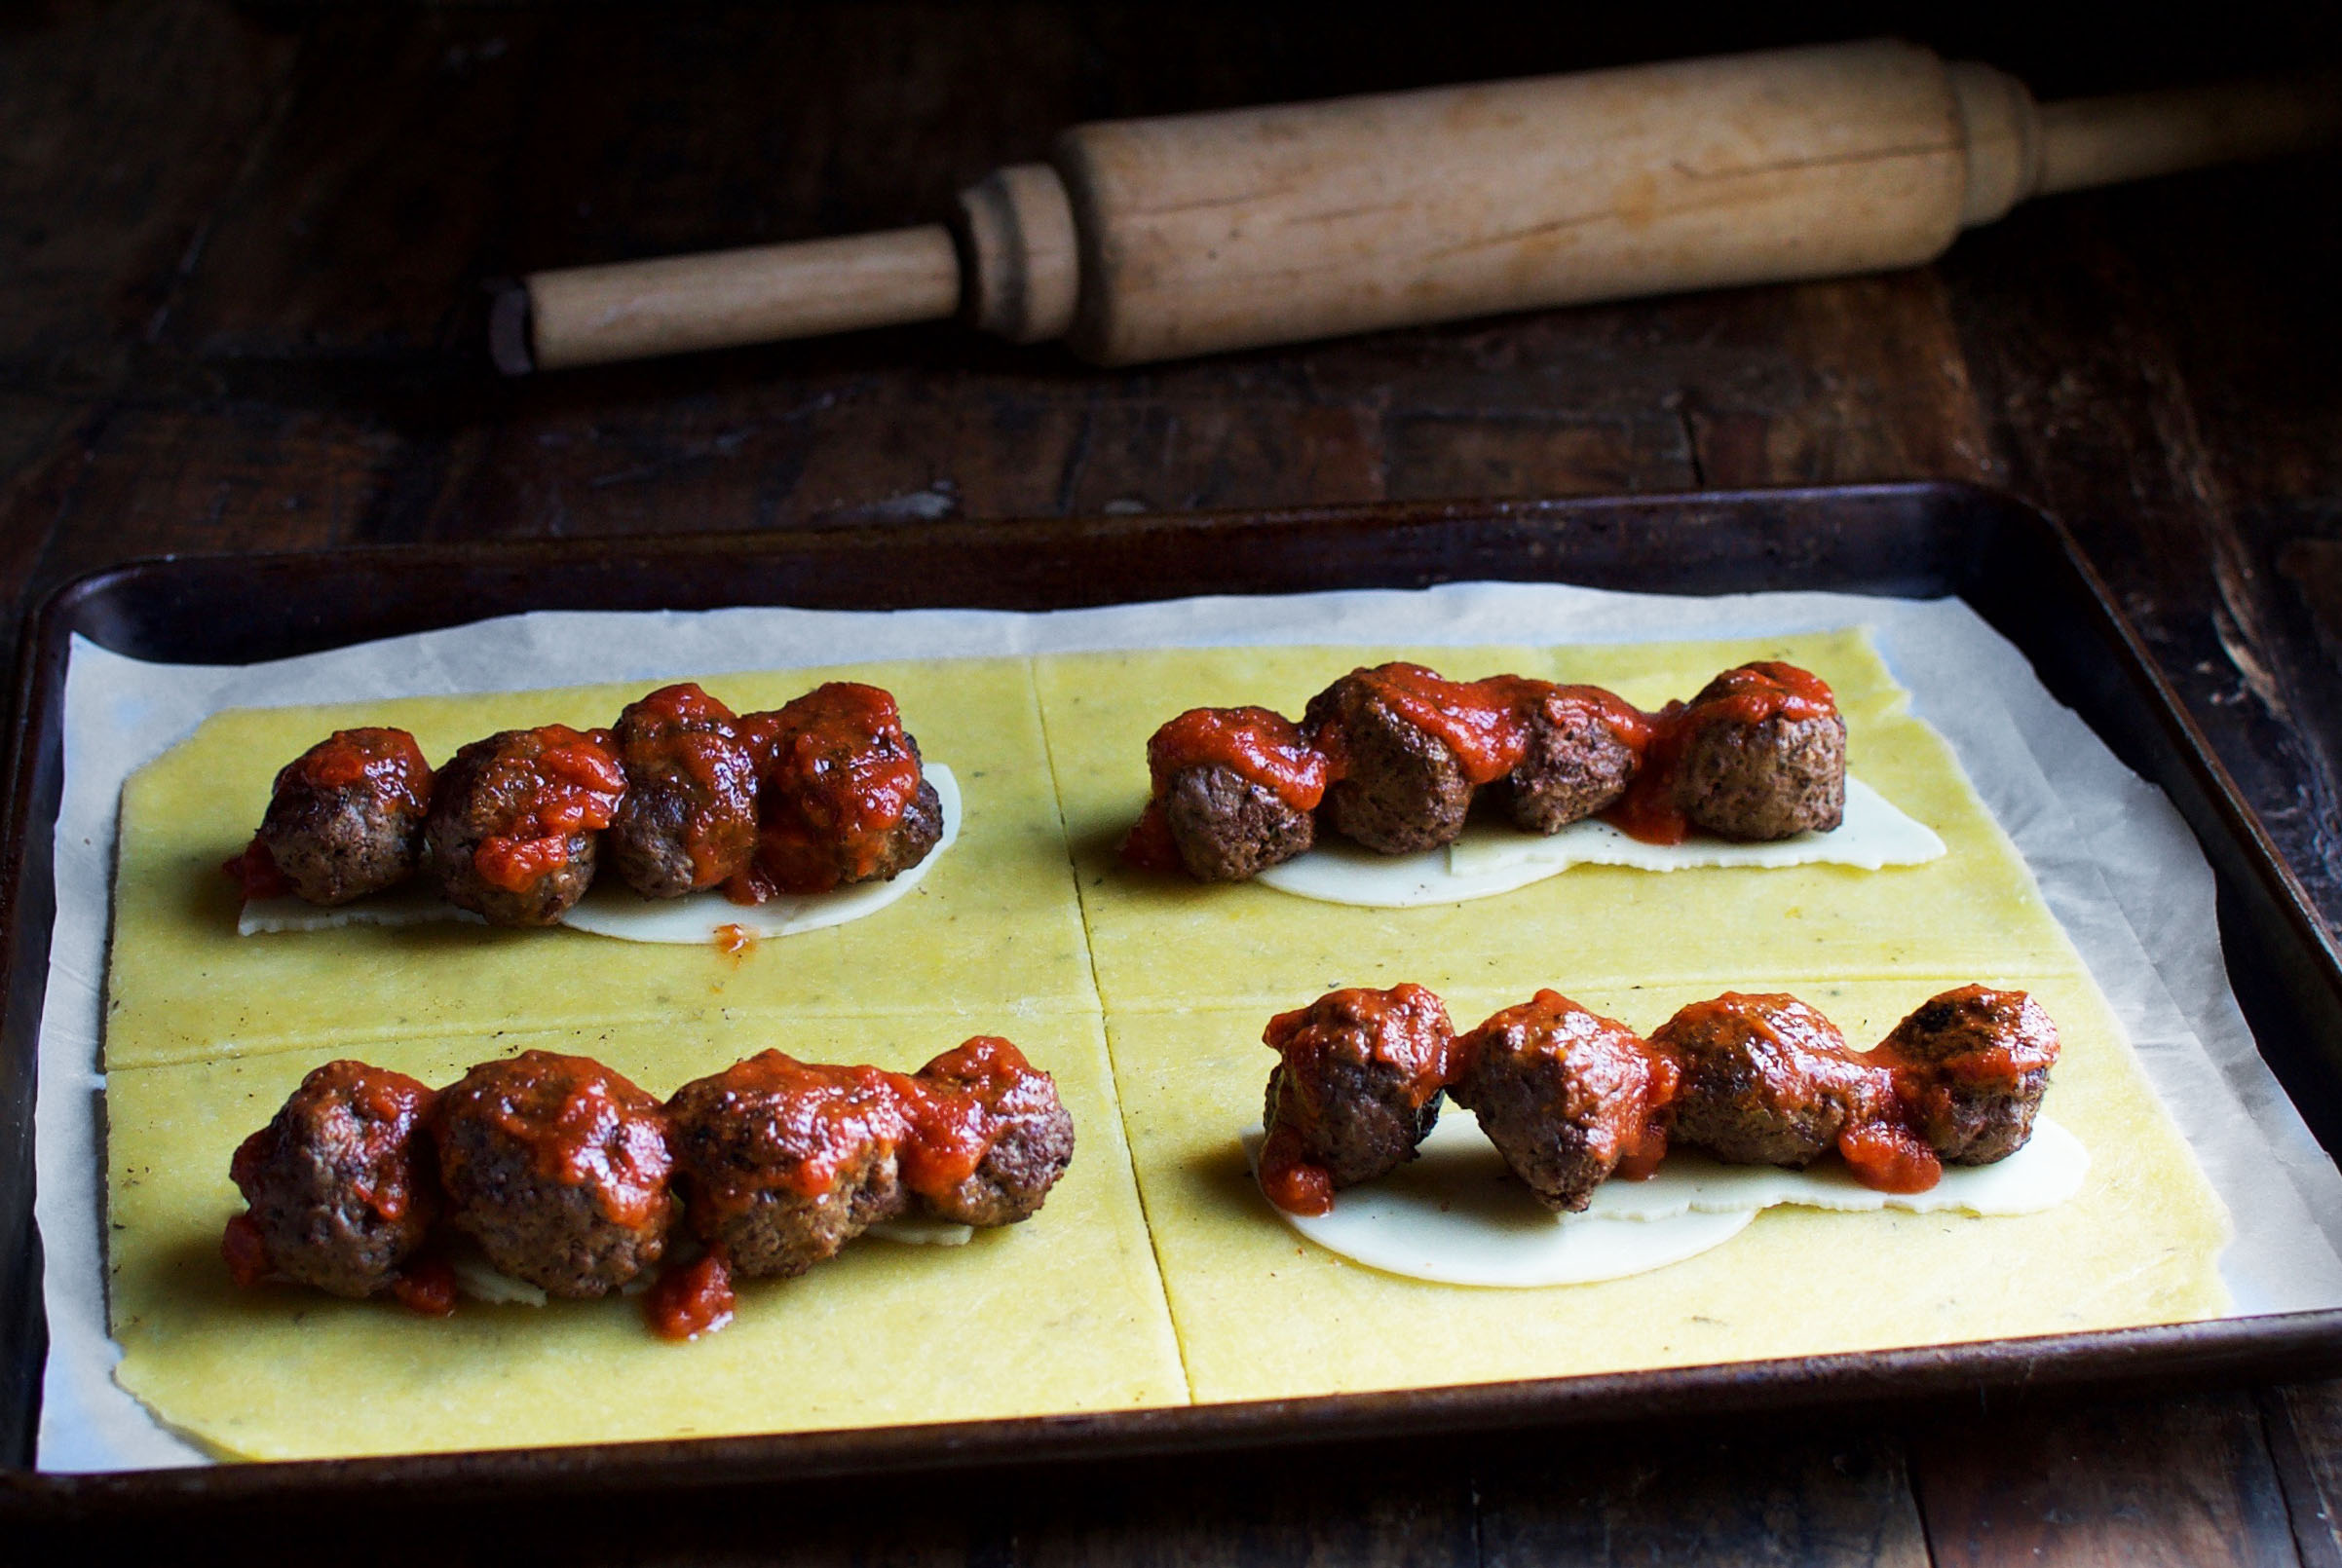 Low-Carb Meatball Subs